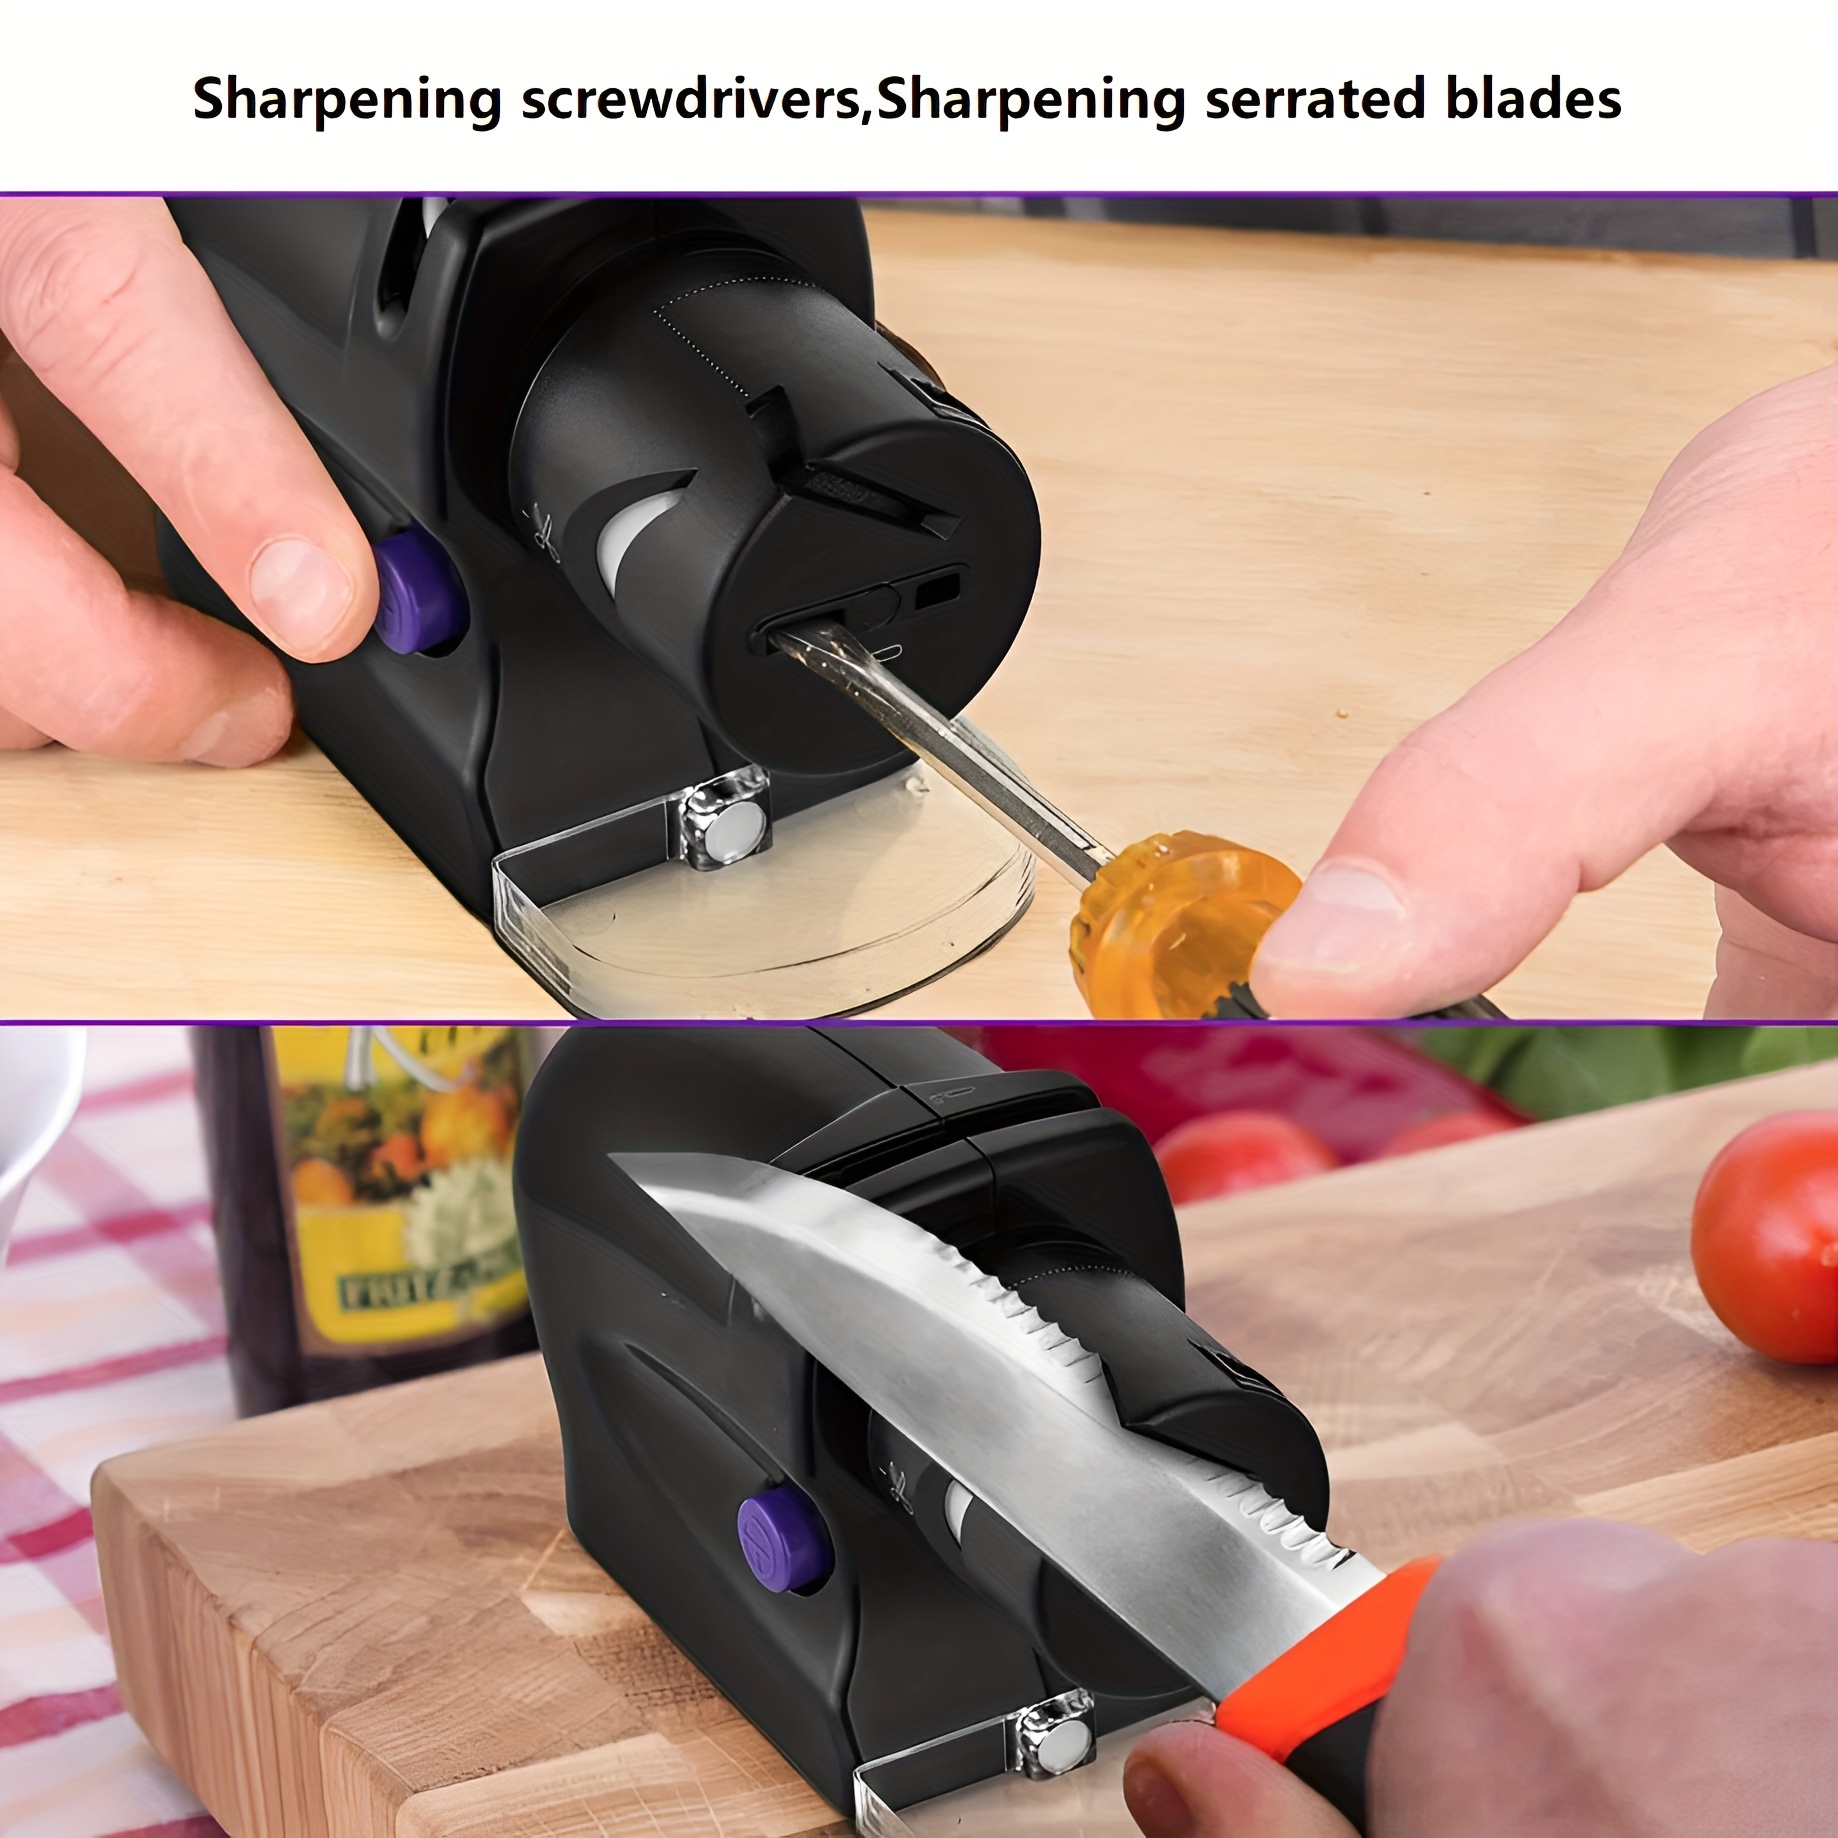 Tumbler Knife Sharpener: A Convenient Tool for Sharp and Efficient